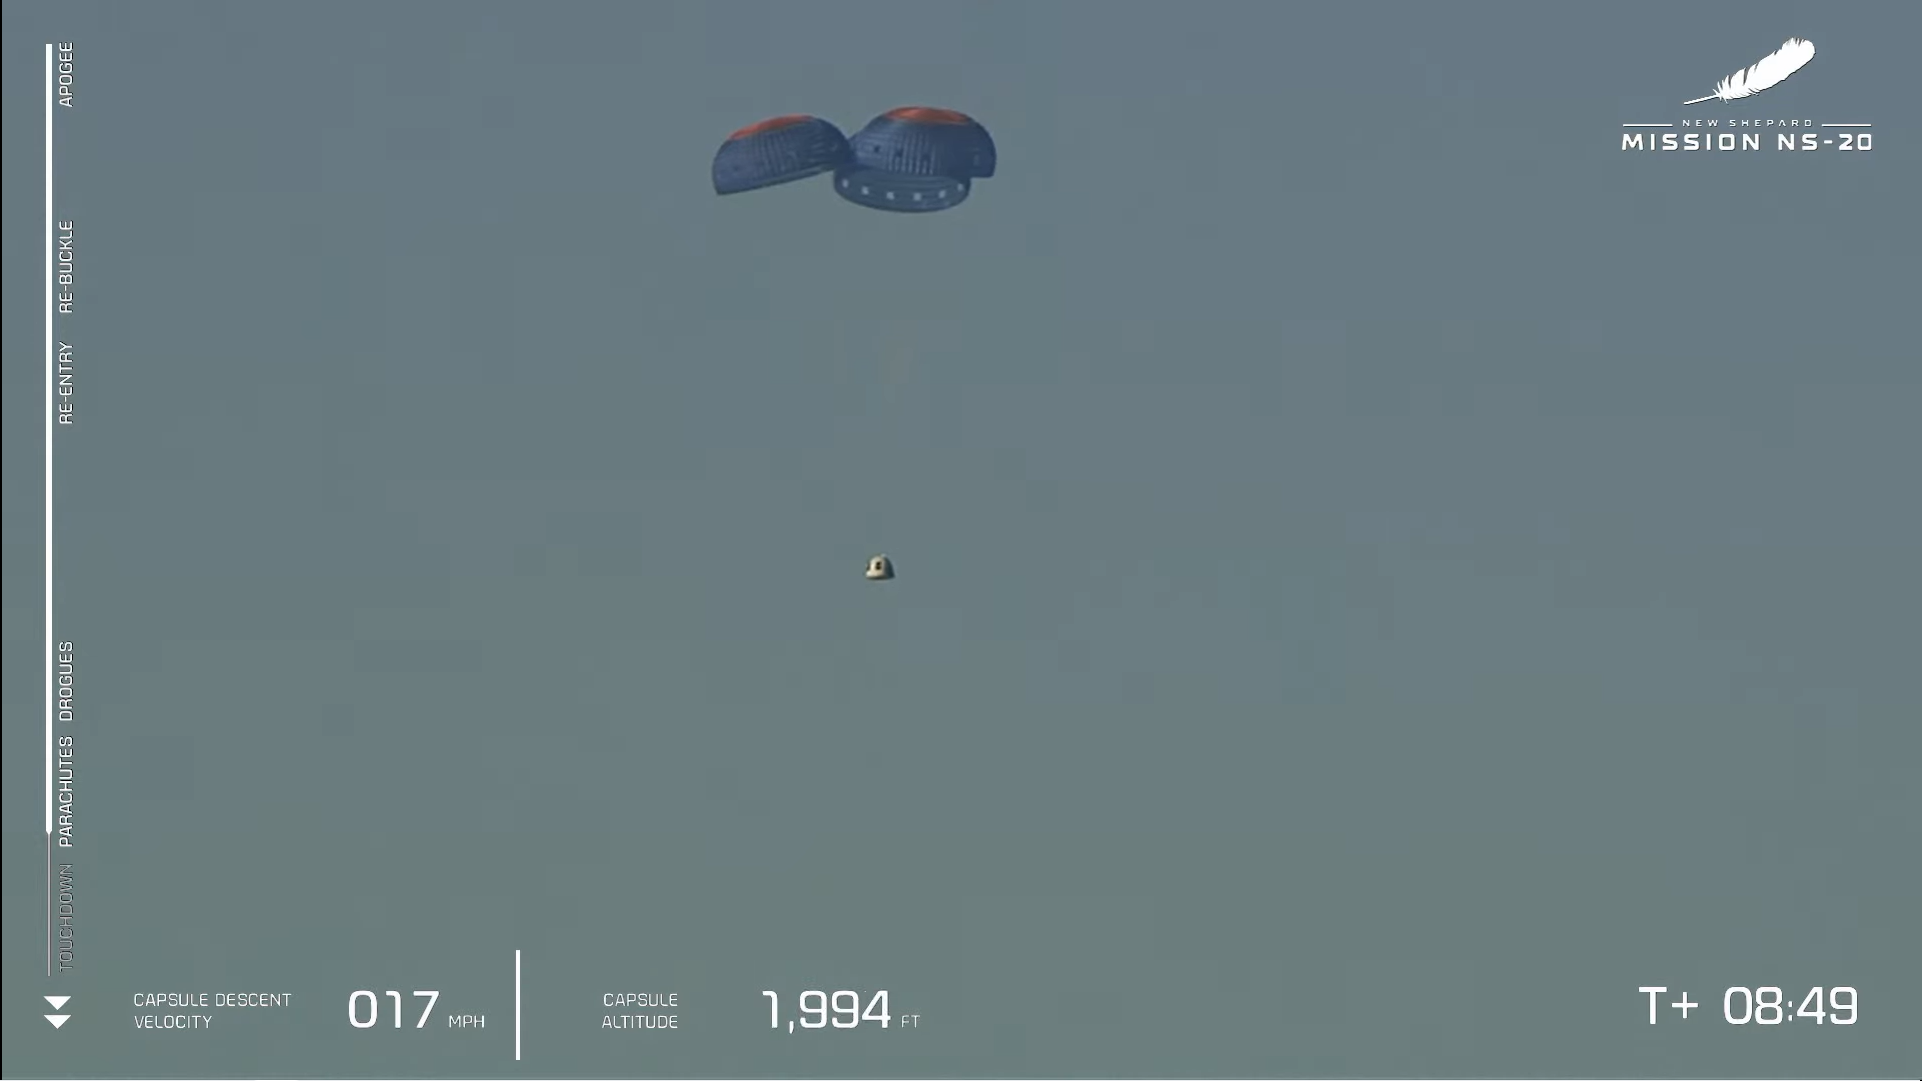 The NS-20 capsule and its drogue parachutes.